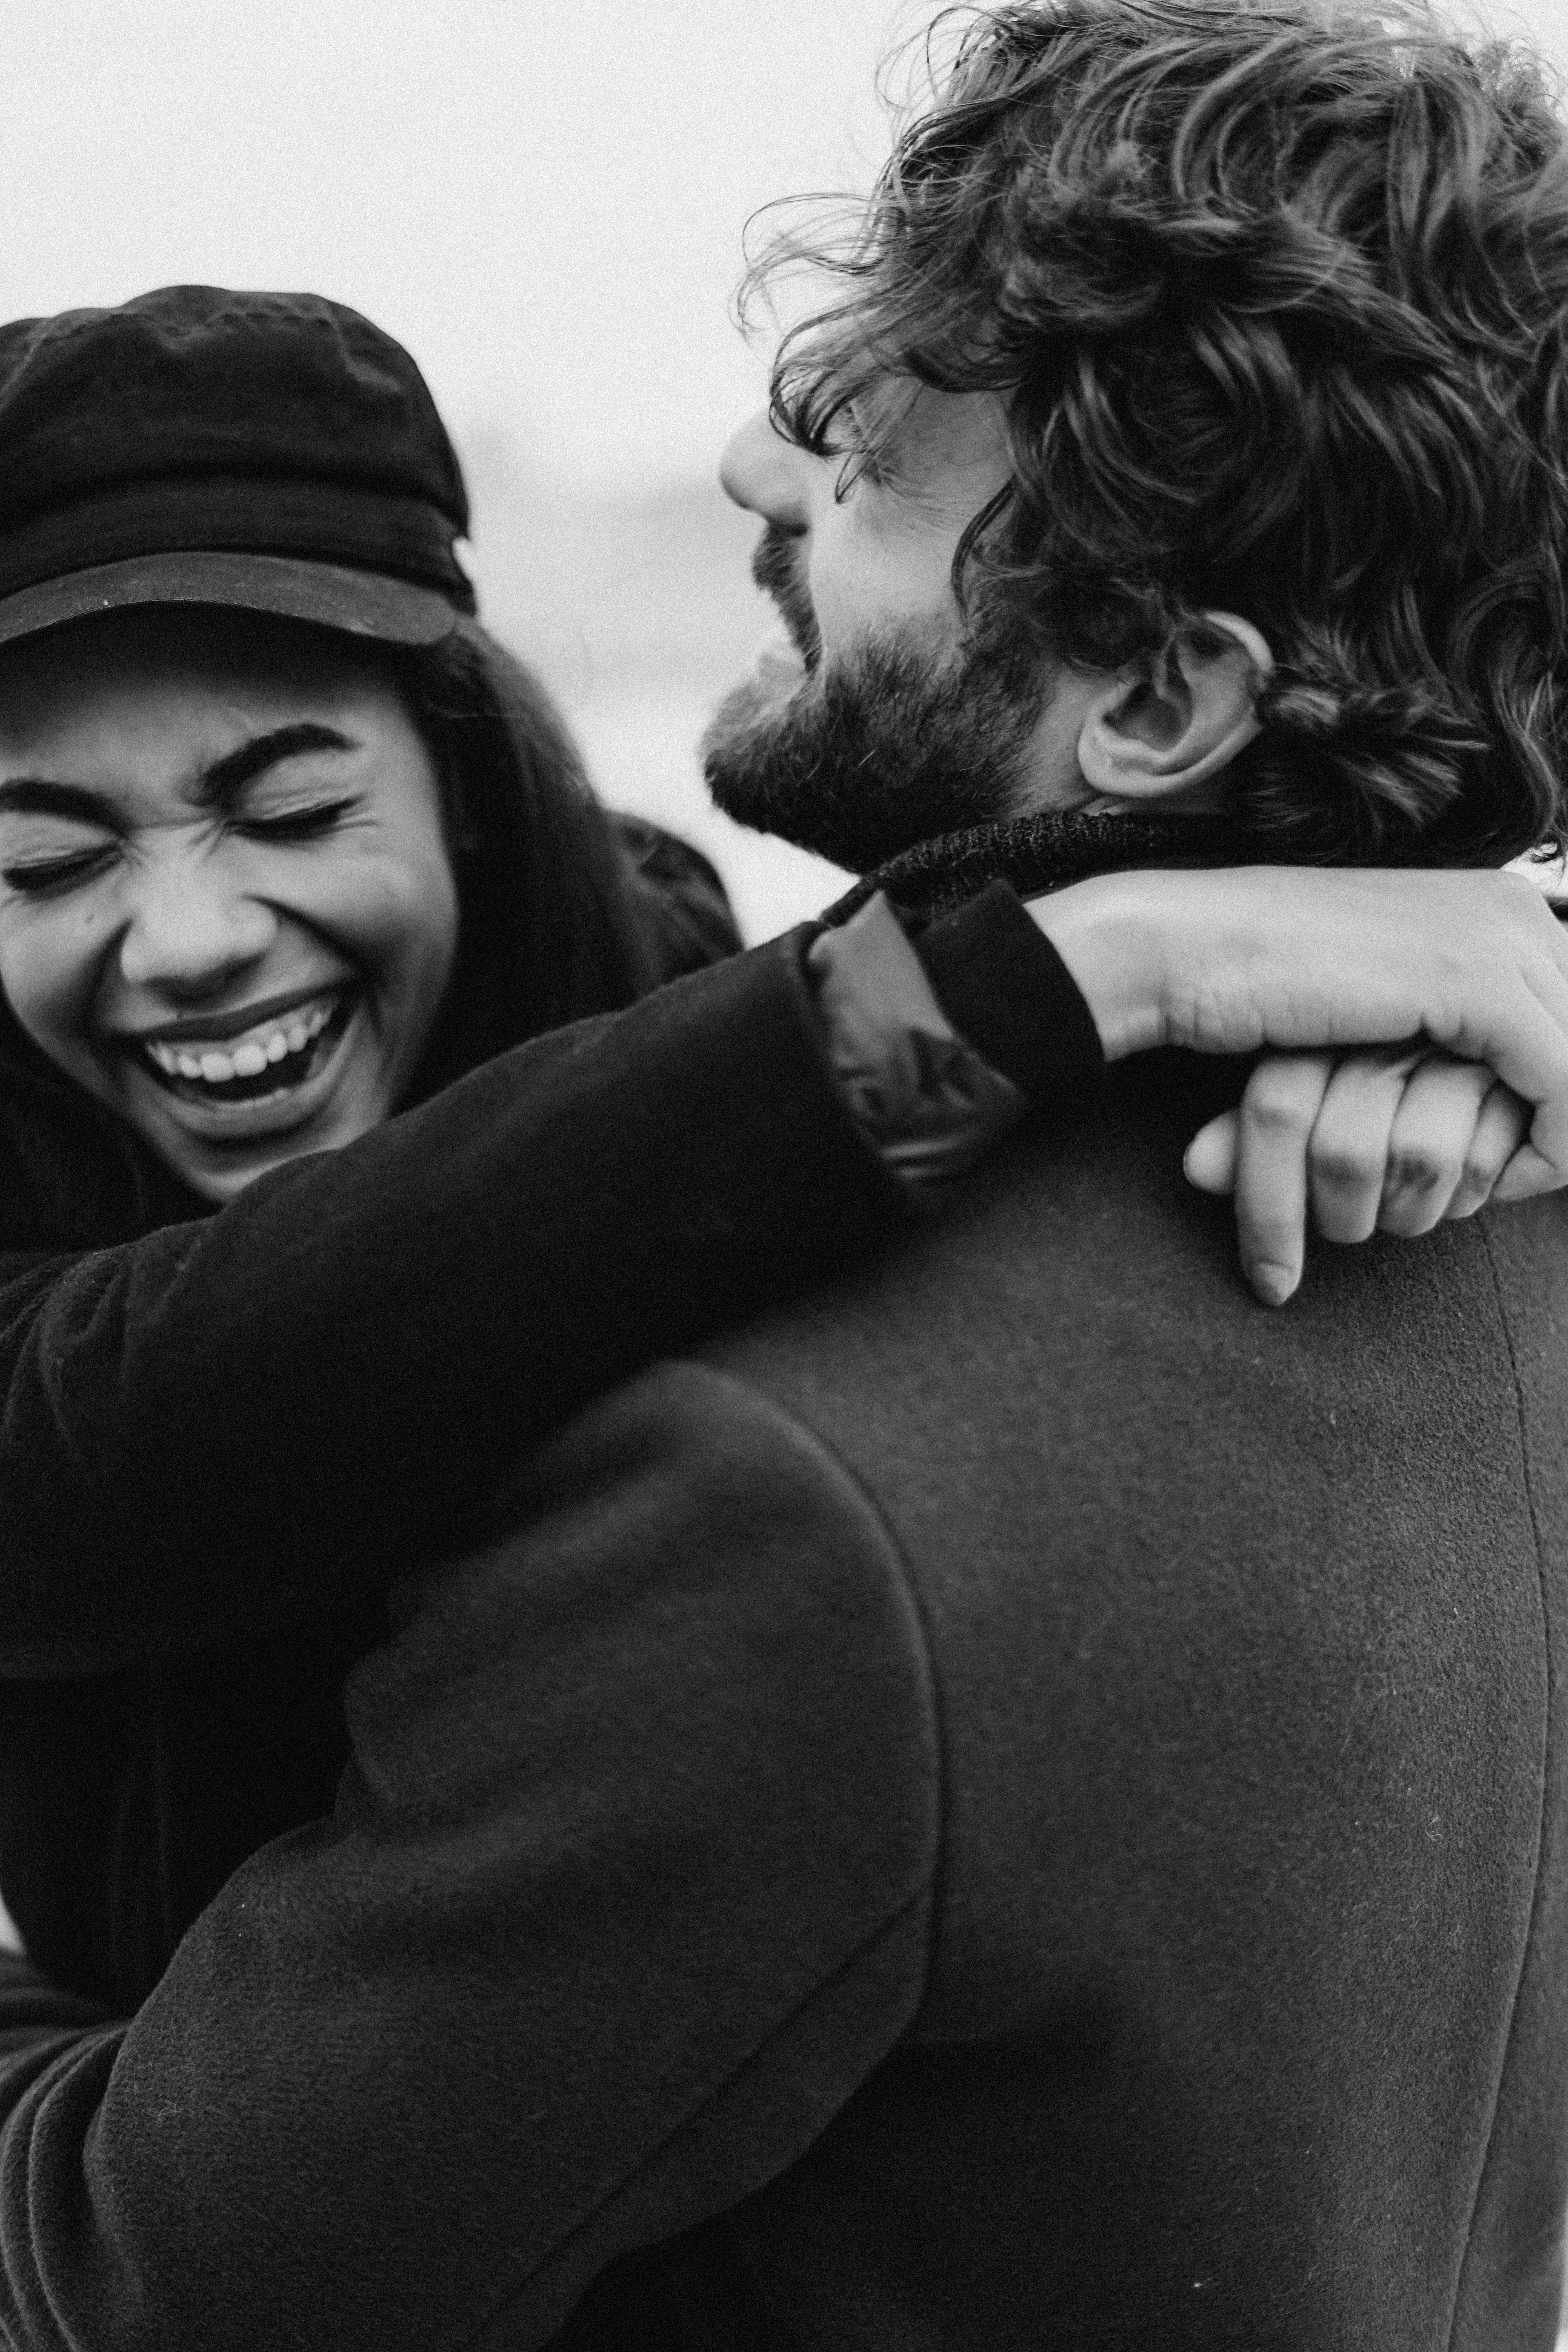 A couple embracing and laughing together | Source: Pexels